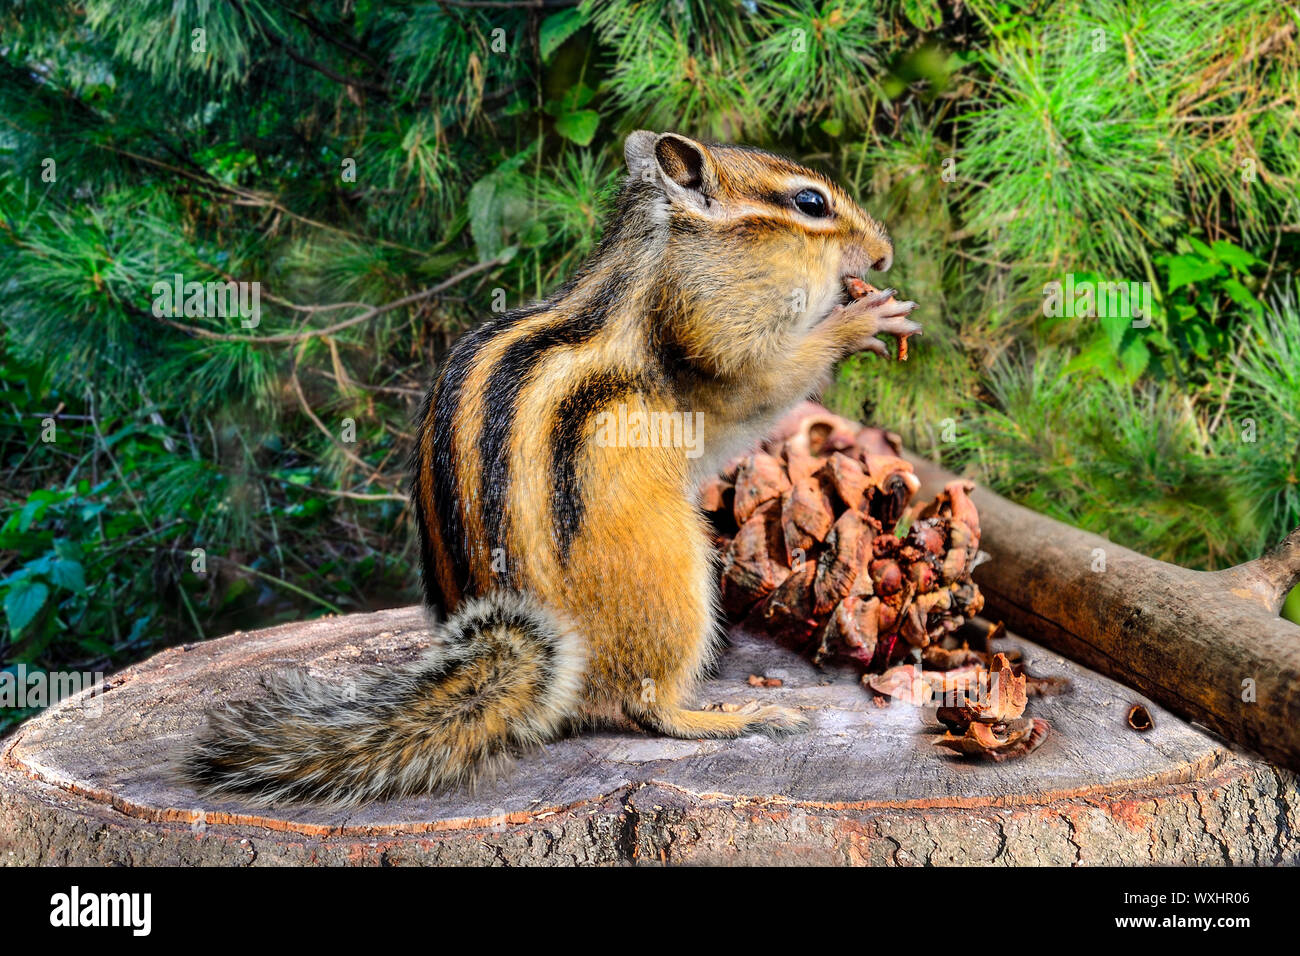 Funny fluffy chipmunk sits on a stump and peels off a pine cone, stuffs its cheeks with pine nuts, harvesting food for the winter. Chipmunk close up, Stock Photo